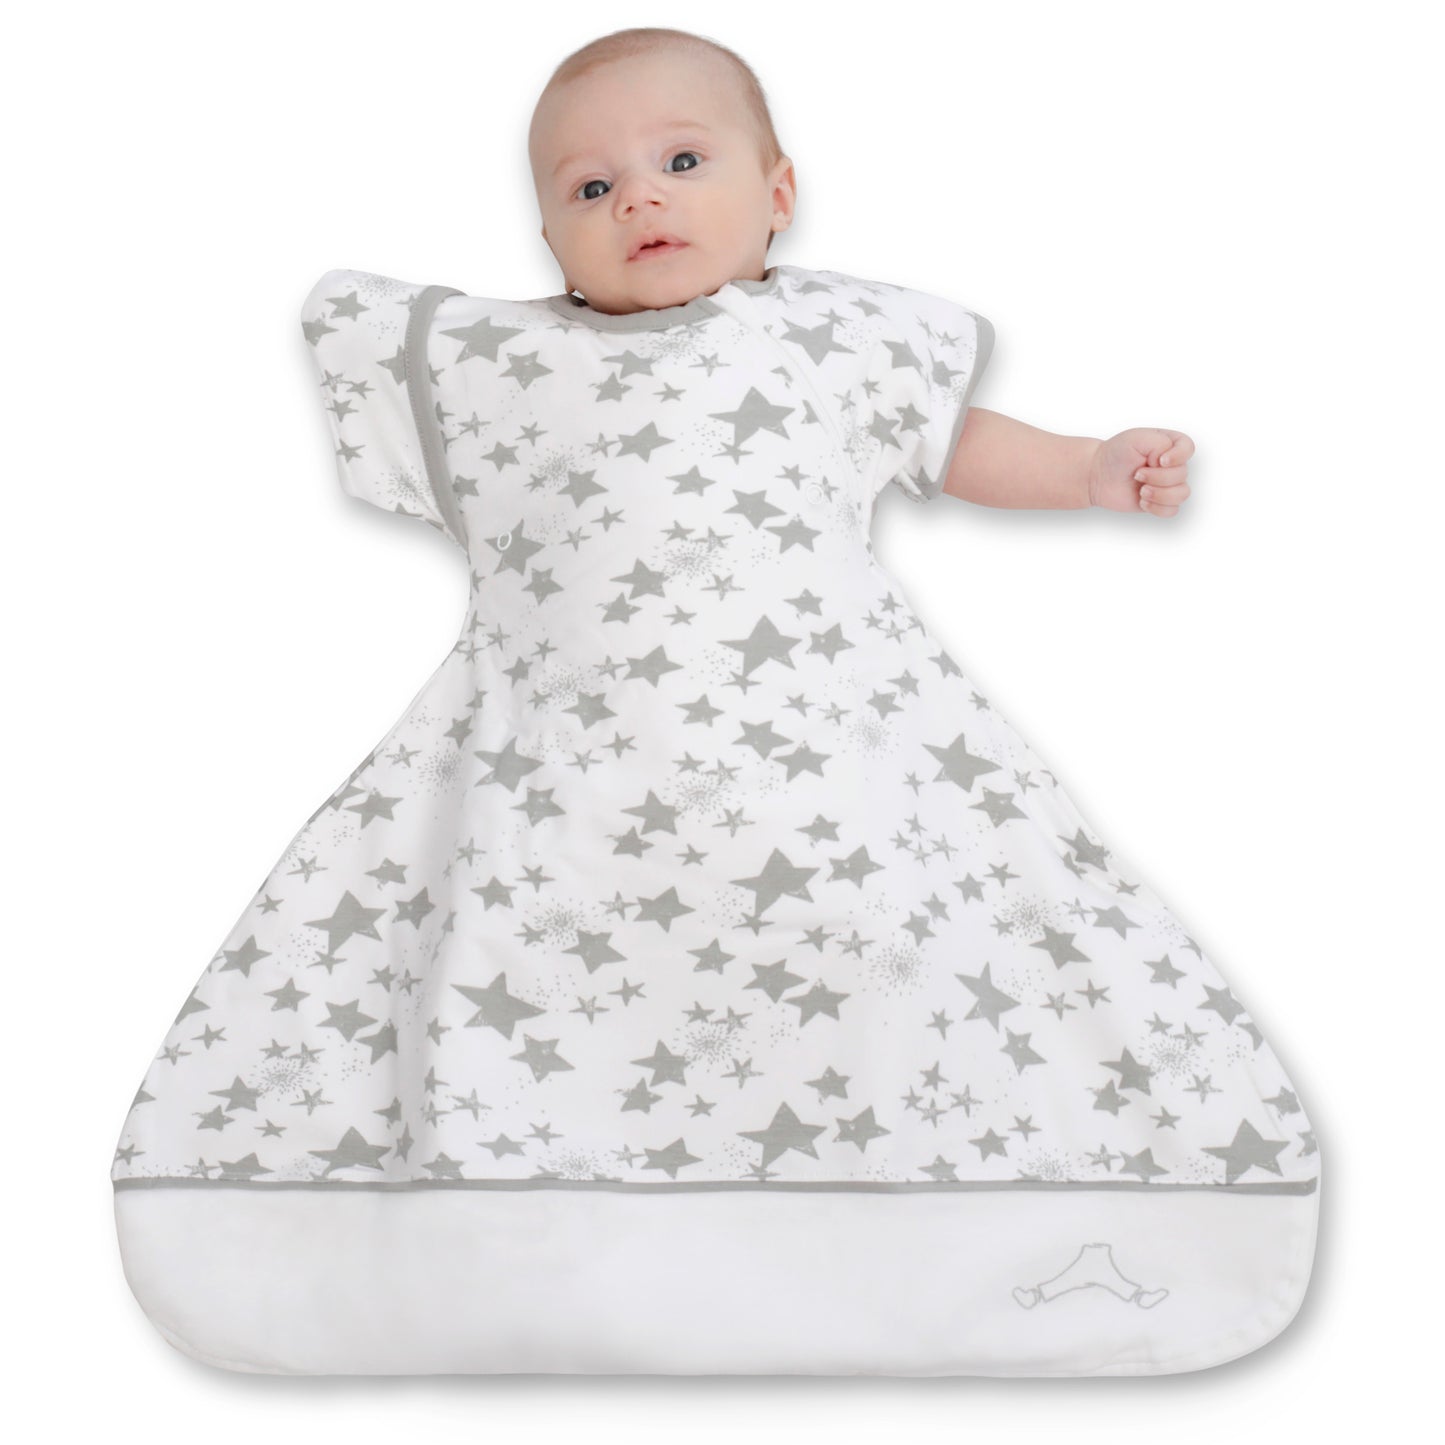 Swaddle Sack Arms Up, fits Newborn Babies 0-6 Months (Stars)